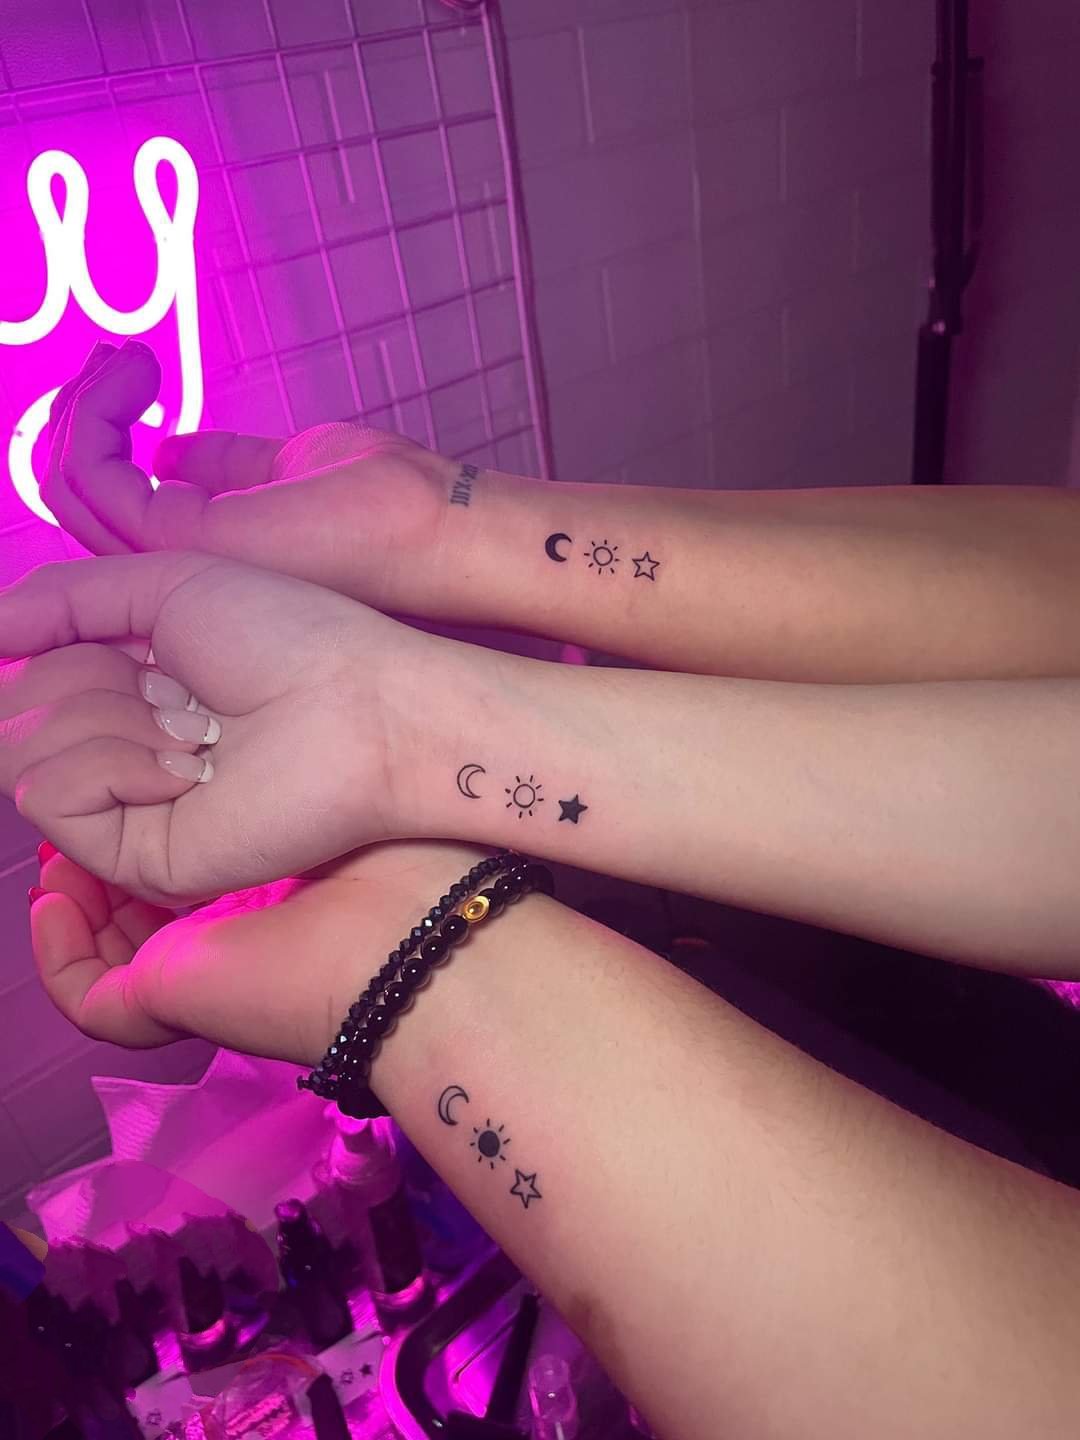 22 Amazing Matching Tattoos to Get With Your Best Friend  Friendship  tattoos Matching tattoos Small bff tattoos